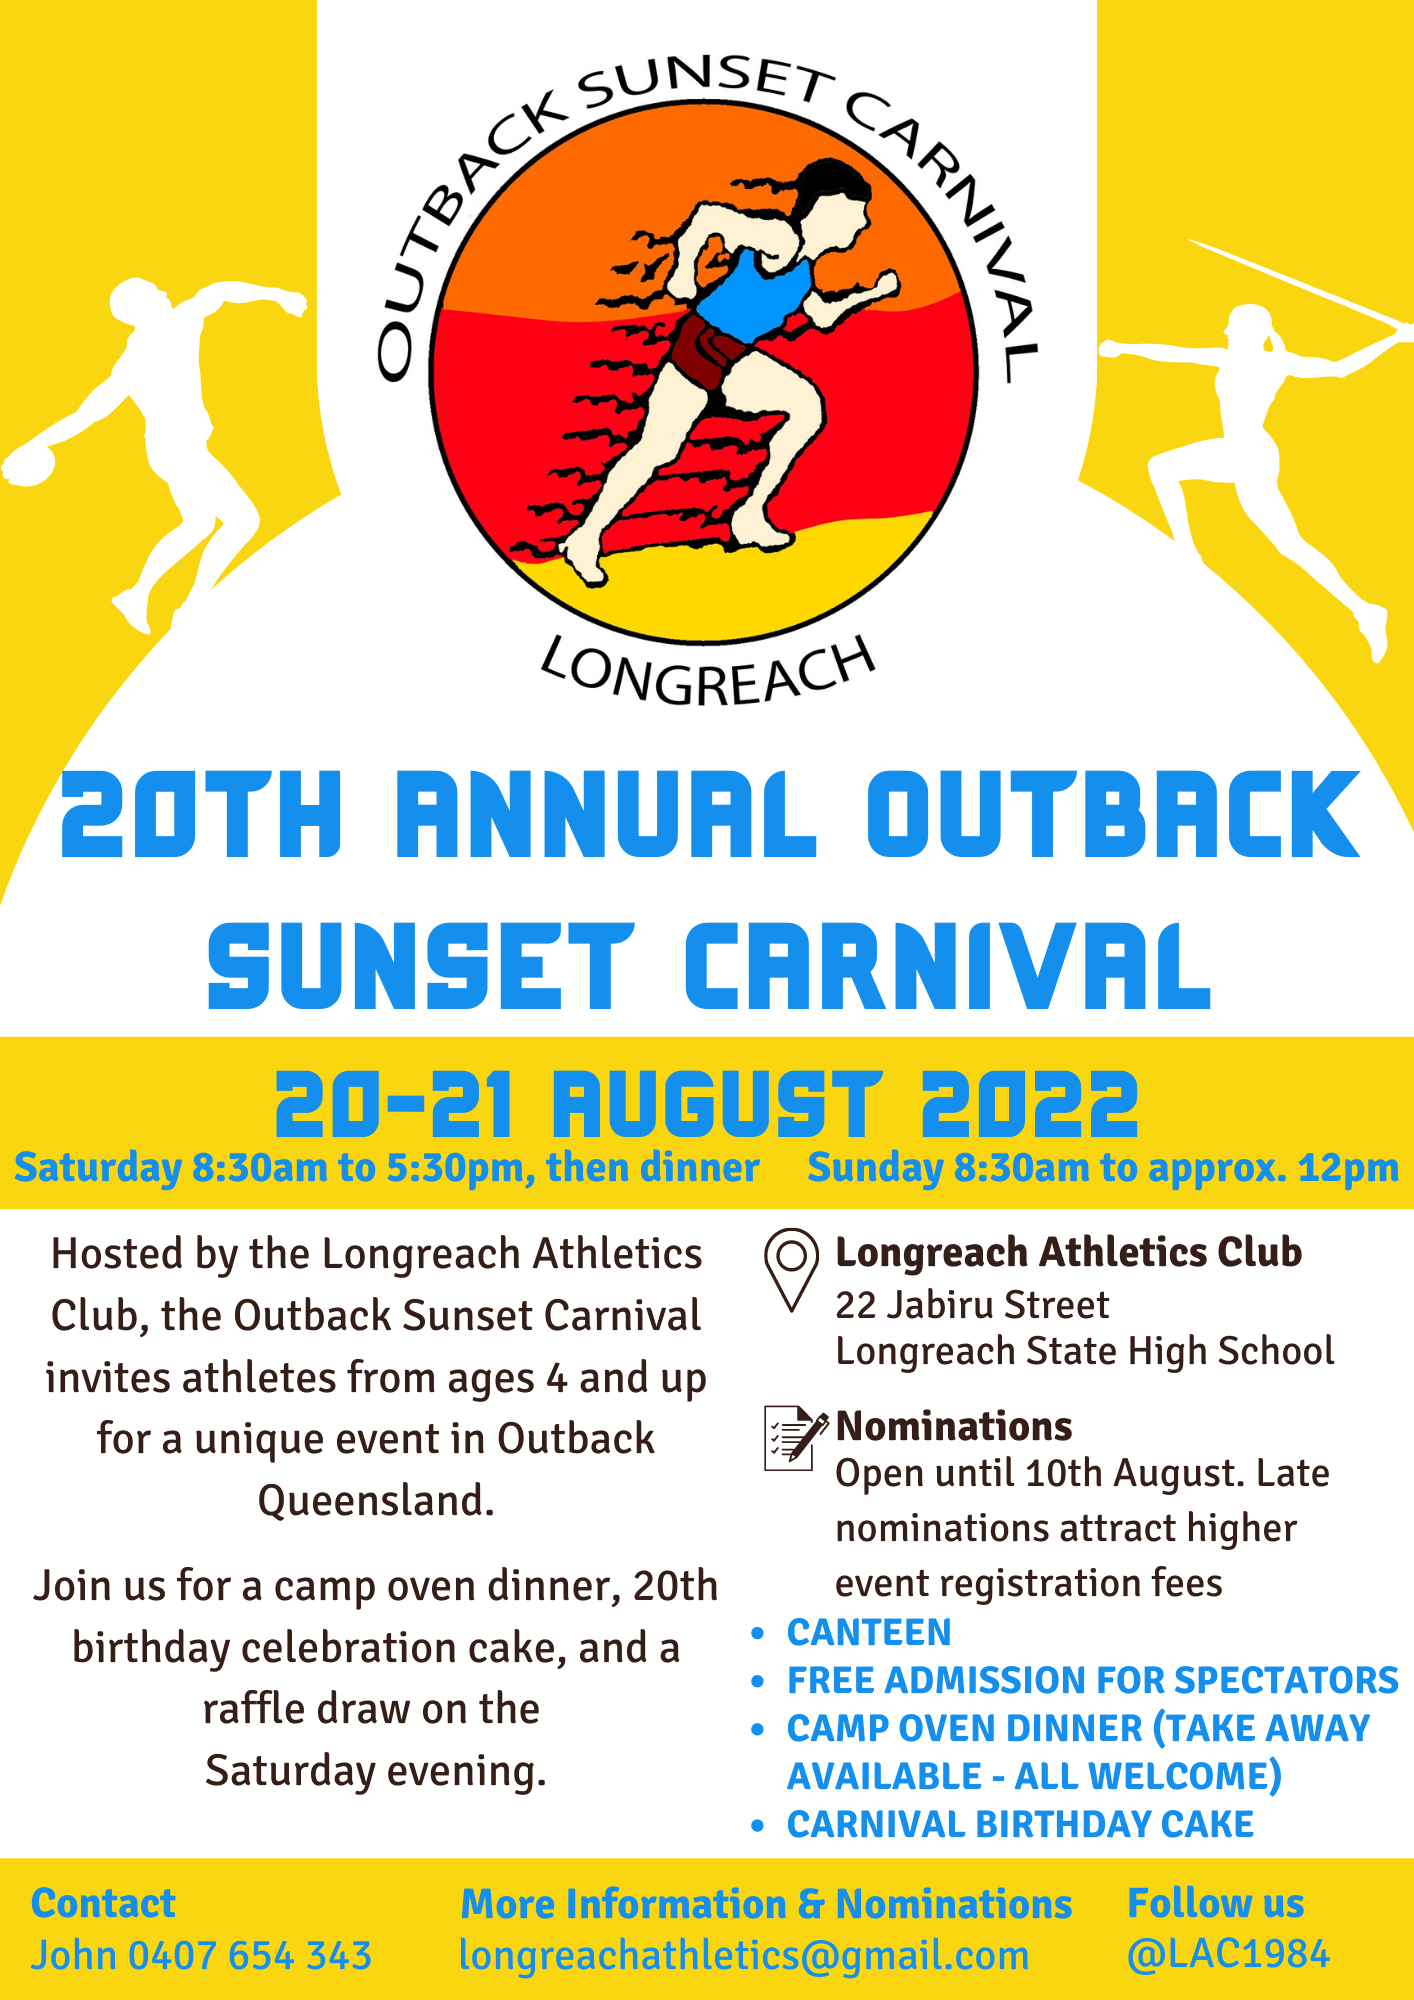 20th Annual Outback Sunset Carnival